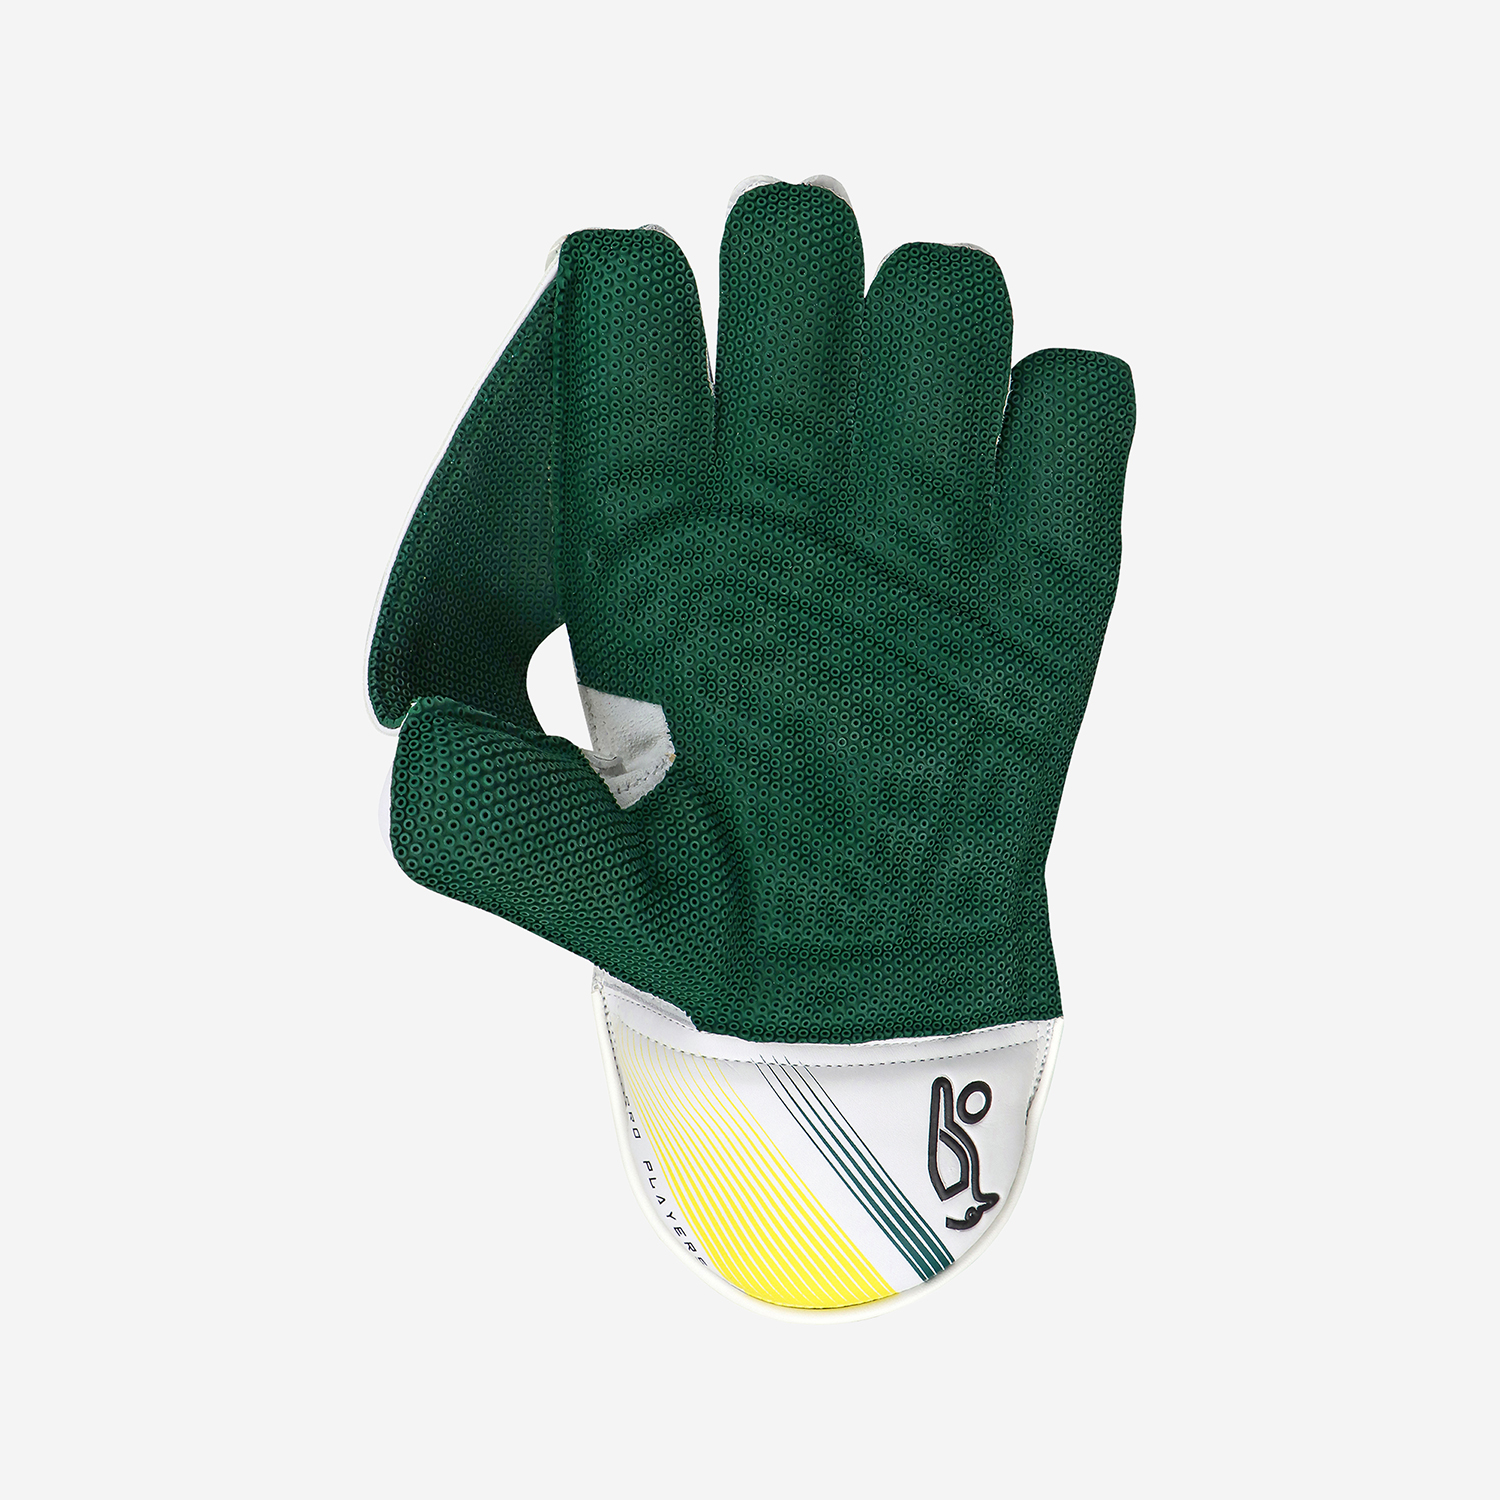 Pro Players Youth Wicket Keeping Gloves